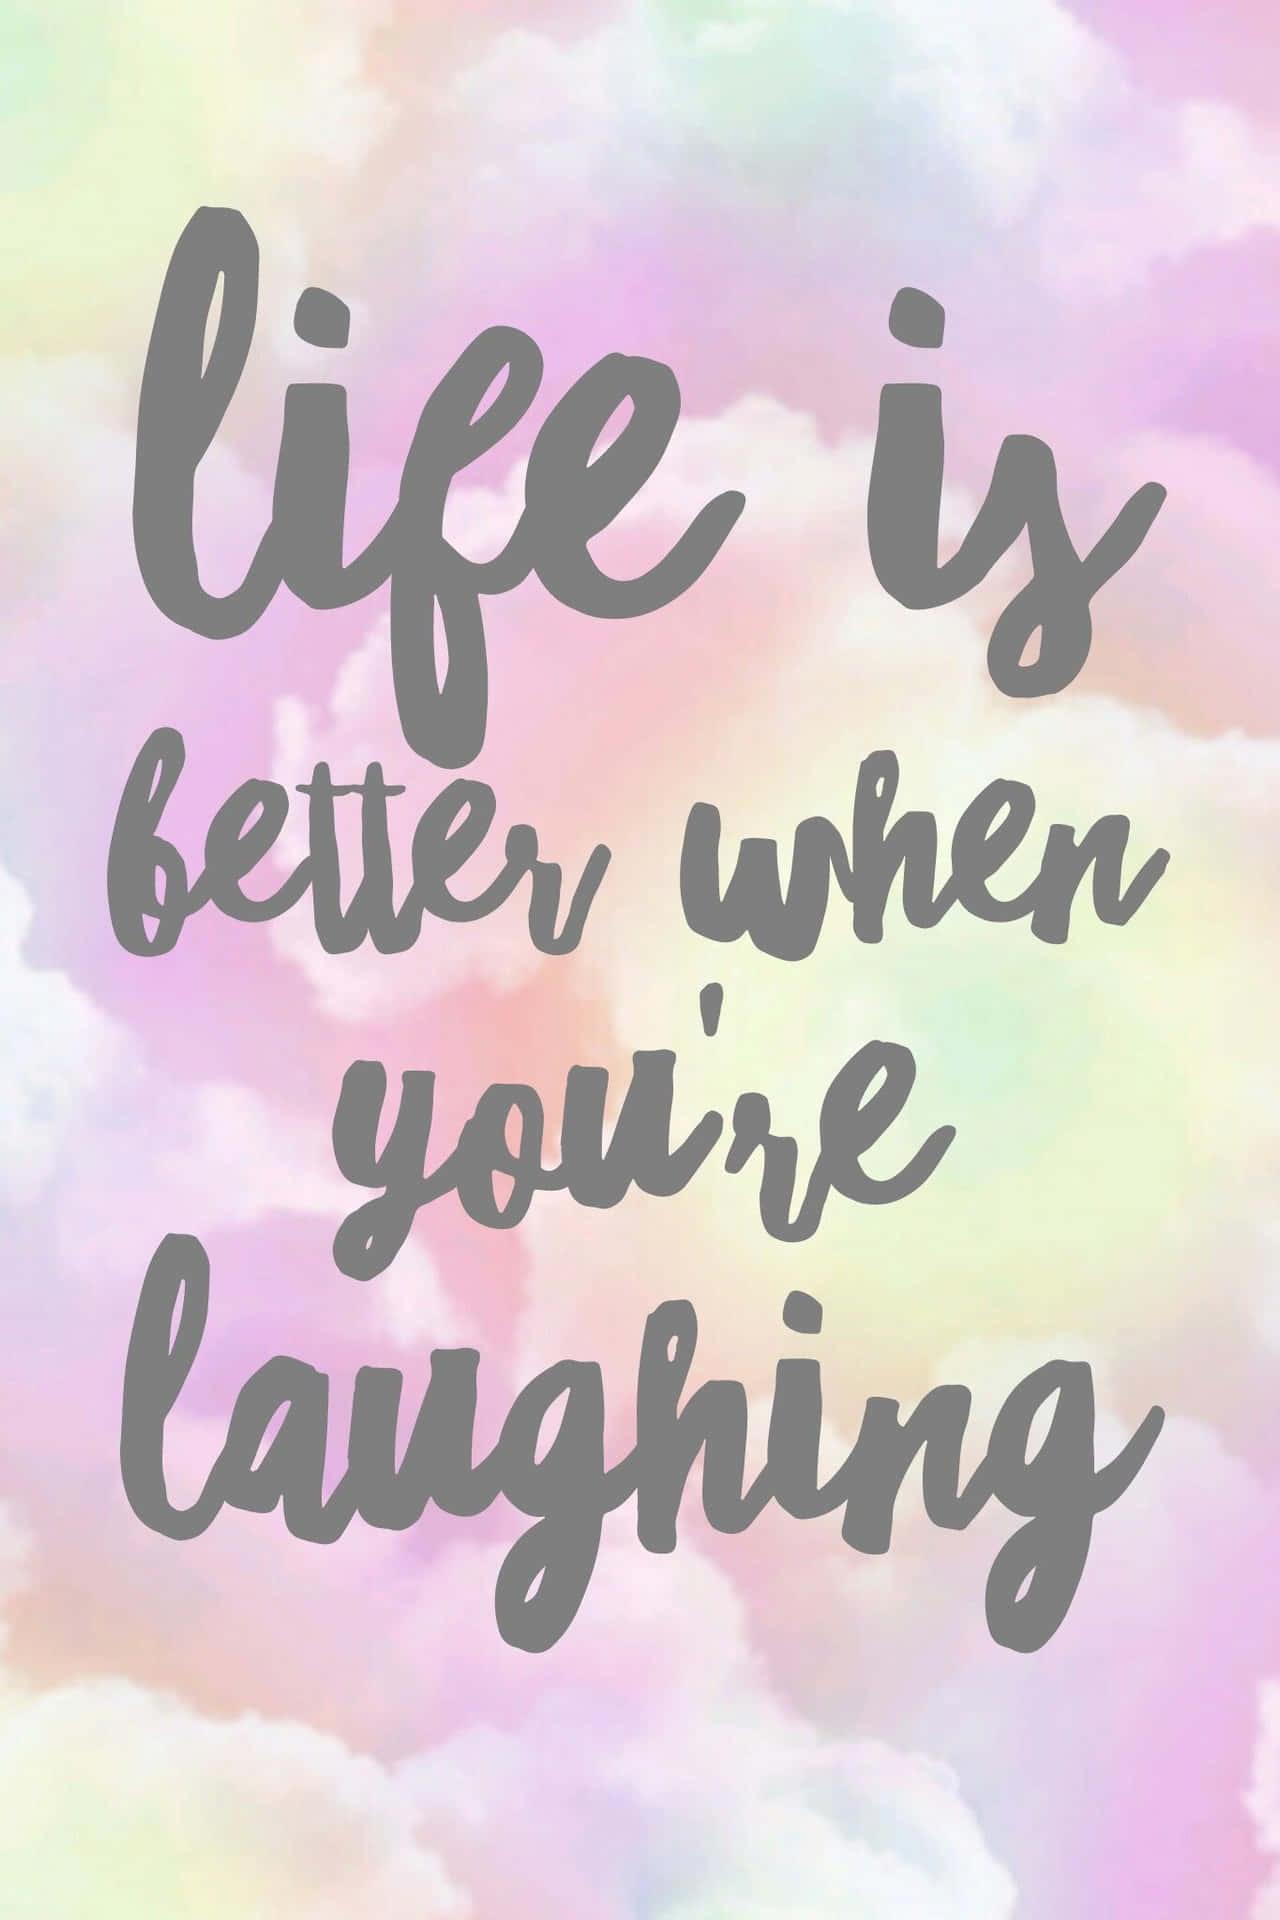 "Laughter is the best medicine!"